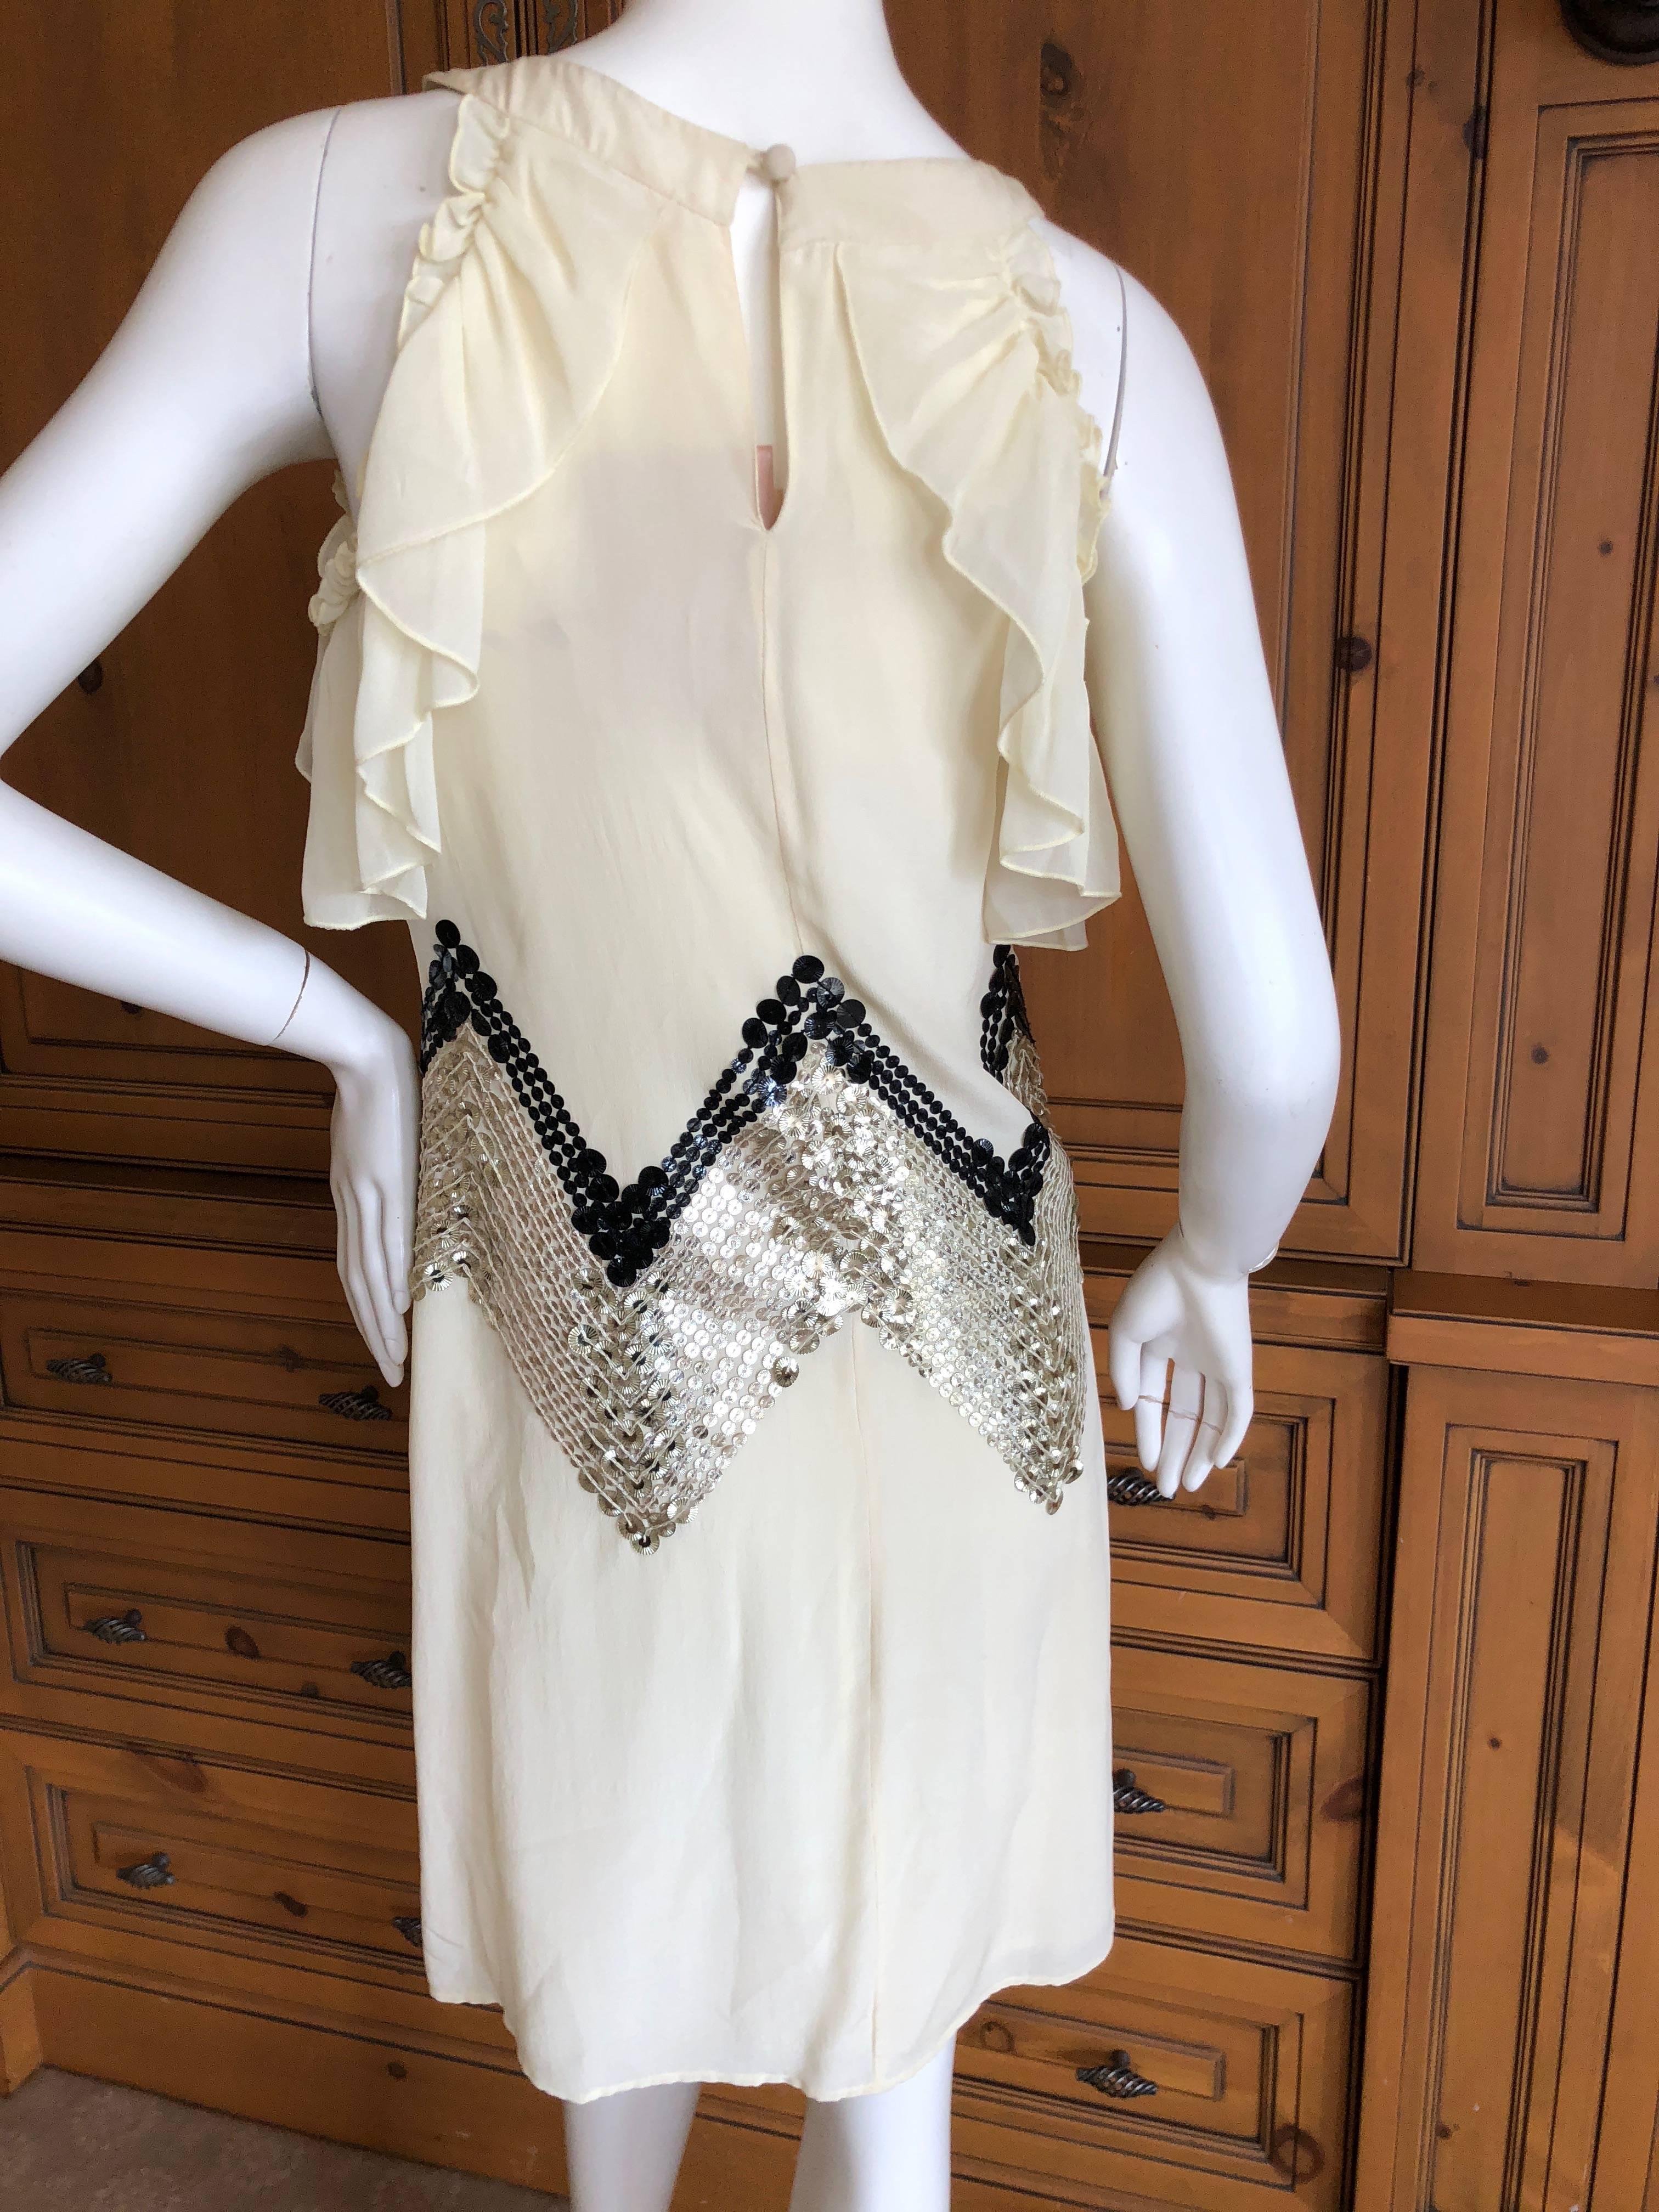 John Galliano Vintage Embellished Chevron Pattern Sequin Dress New With Tags
New with tags.
Size 40
Bust 36